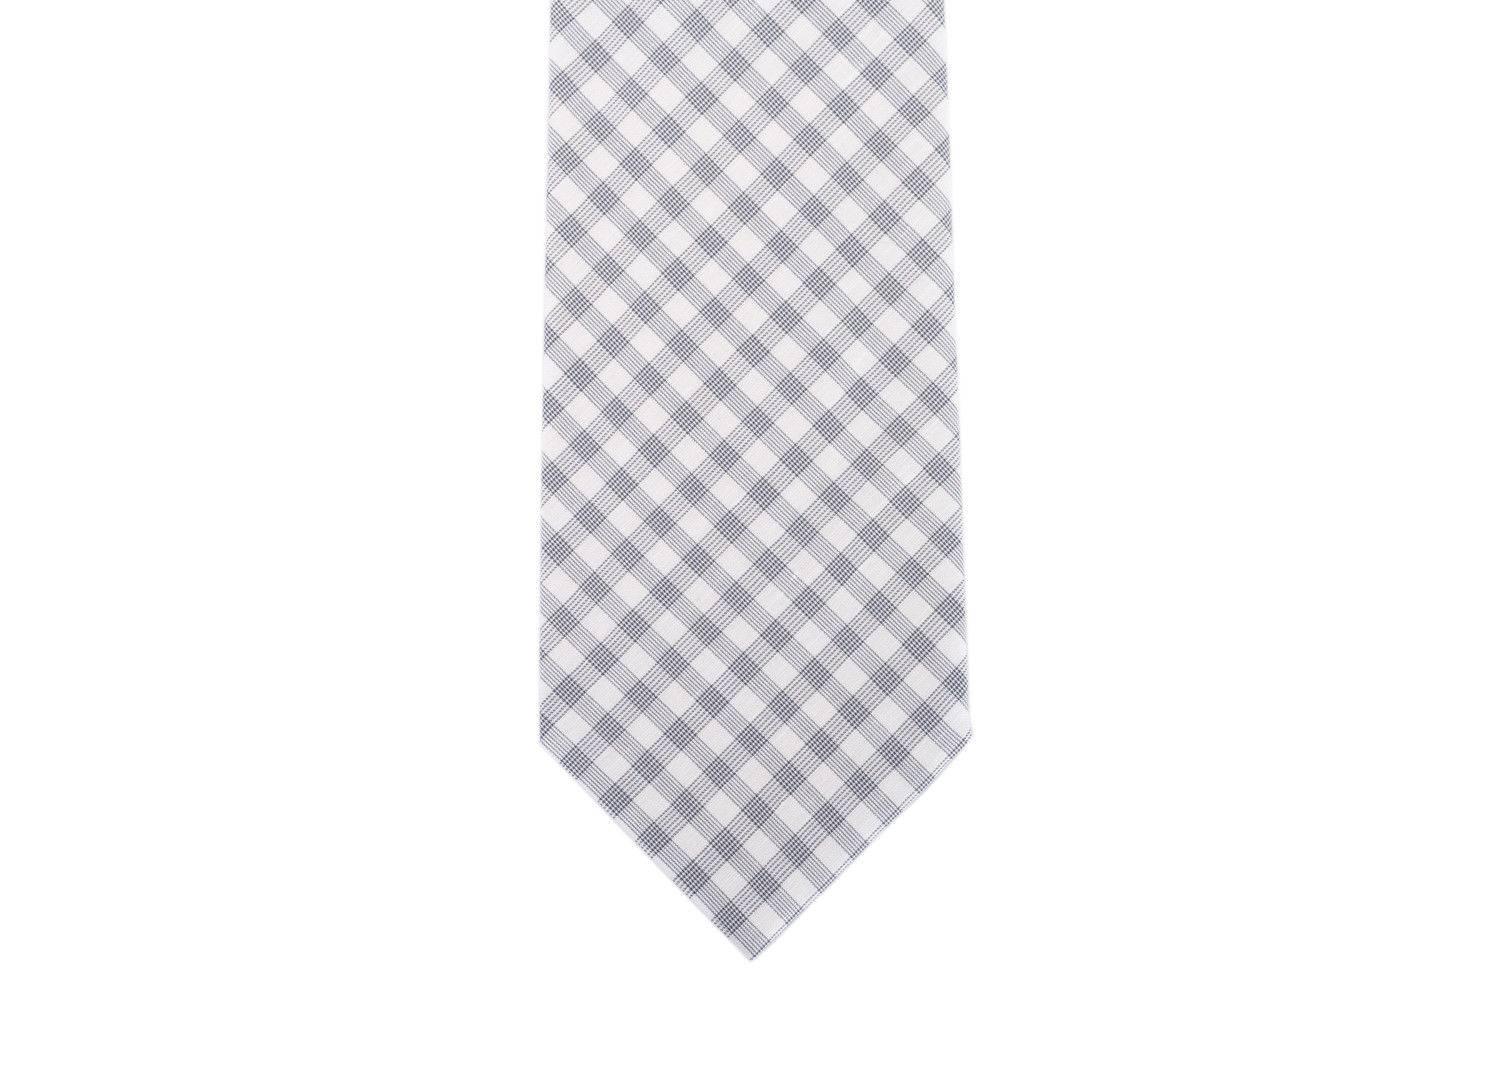 Italian luxury brand, Tom Ford, has crafted these gorgeous Cotton Blend Tie for important special occasions and professional events. The tie is great to pair with your favorite solid color button down and blazers with your chosen pair or classic